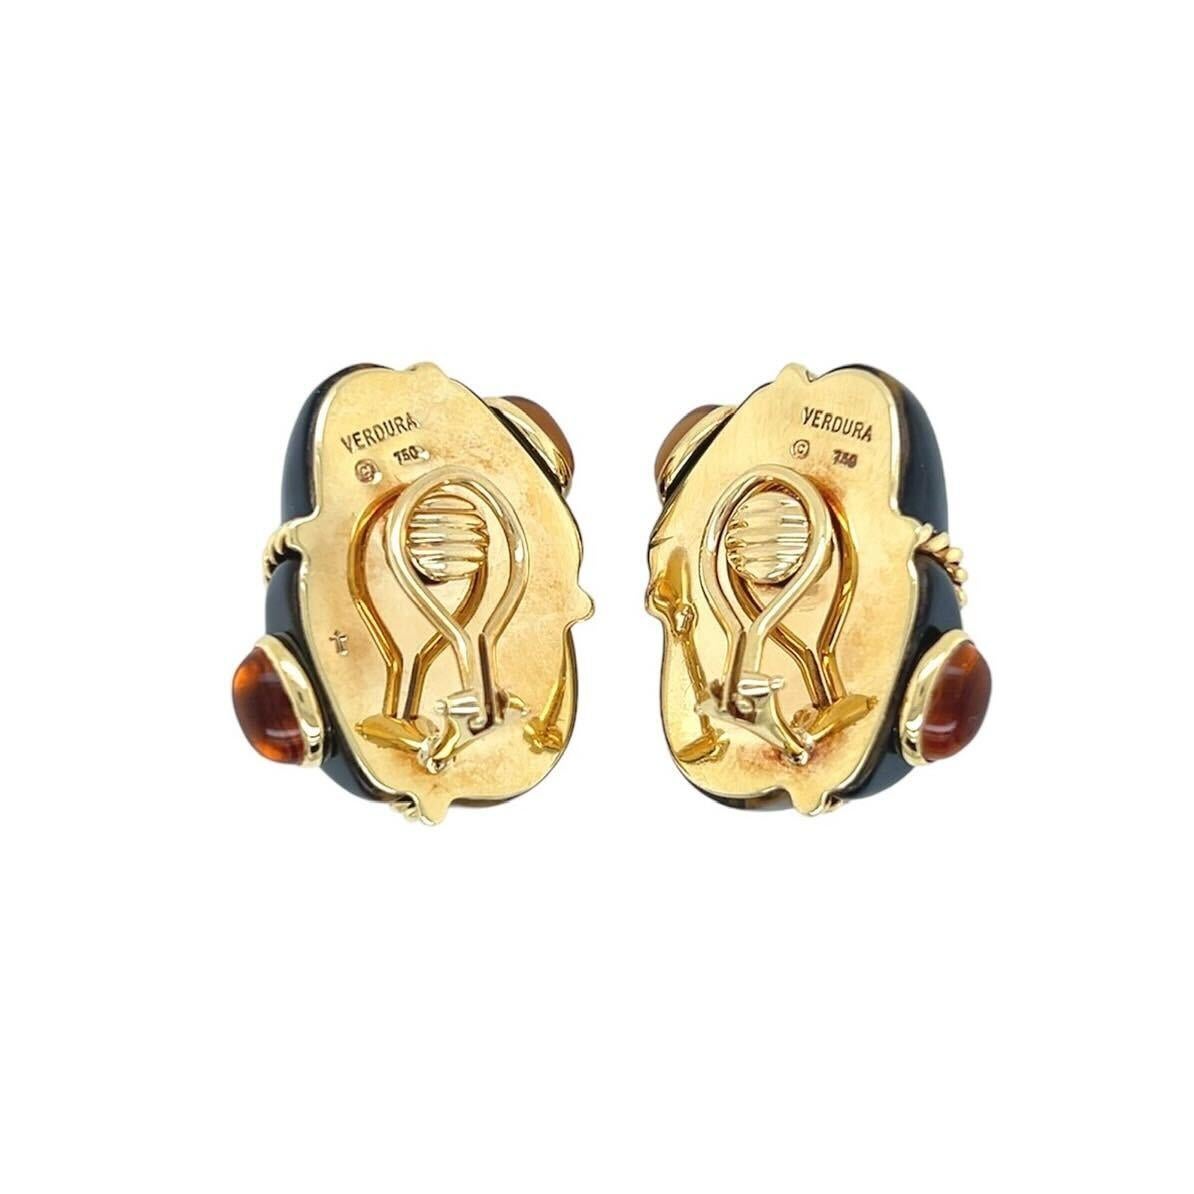 Cabochon VERDURA Yellow Gold, Tiger's Eye and Citrine Earrings